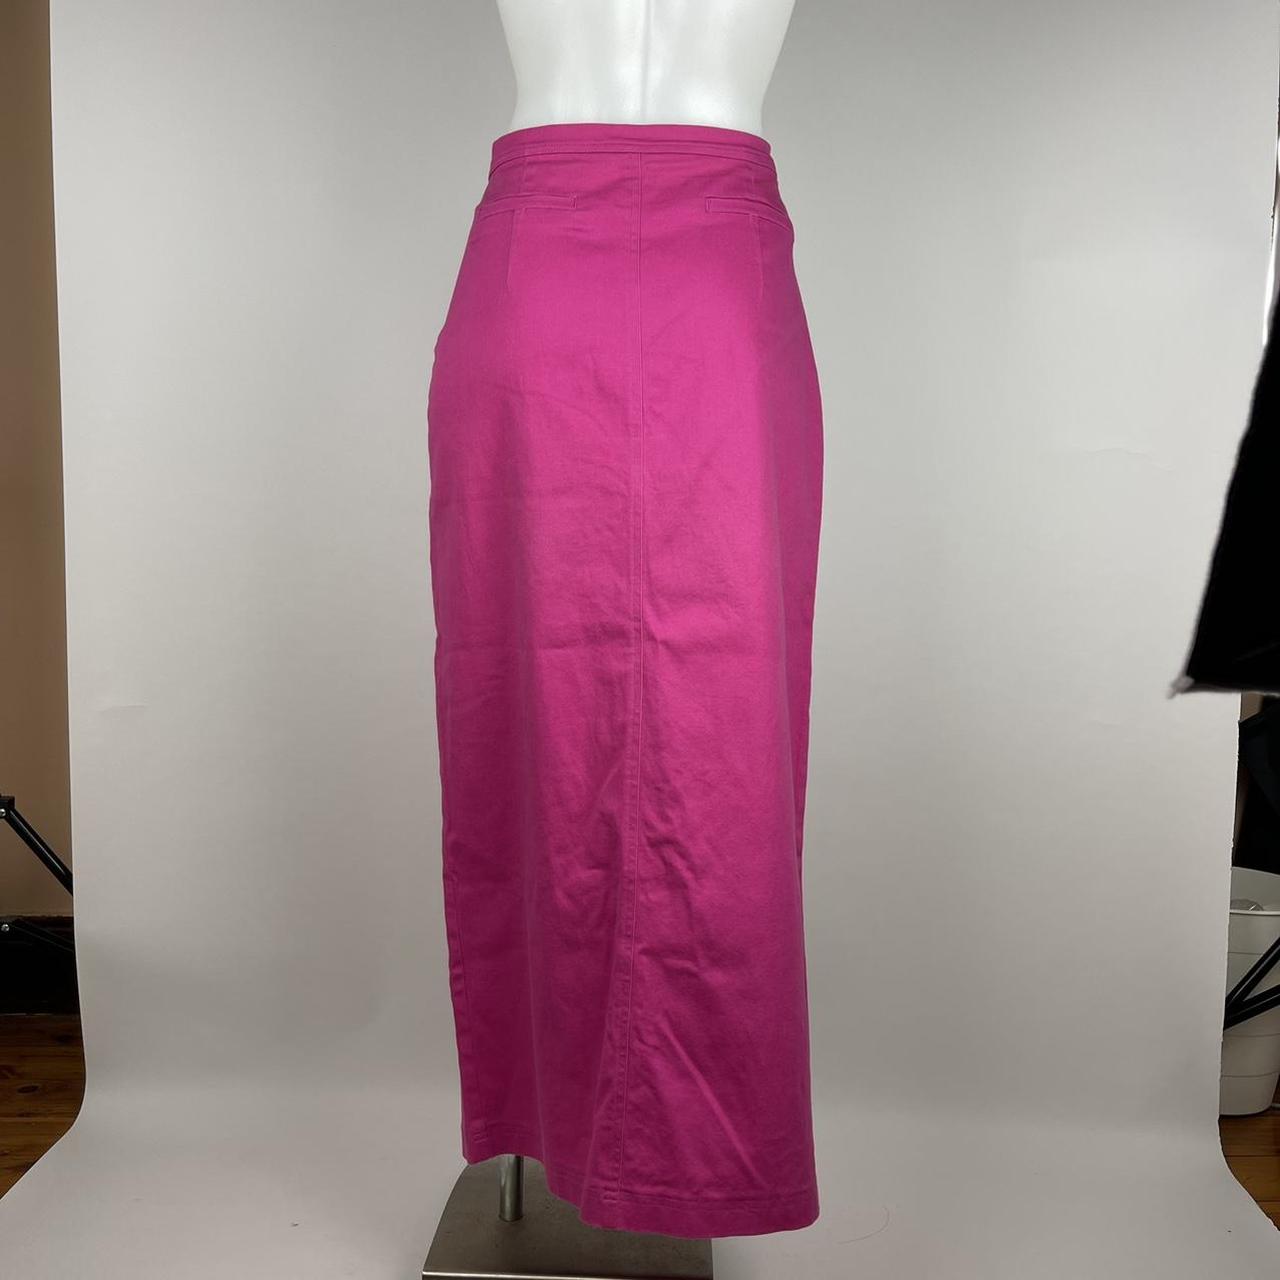 90s 2000s hot pink long maxi skirt with front slit 💓... - Depop